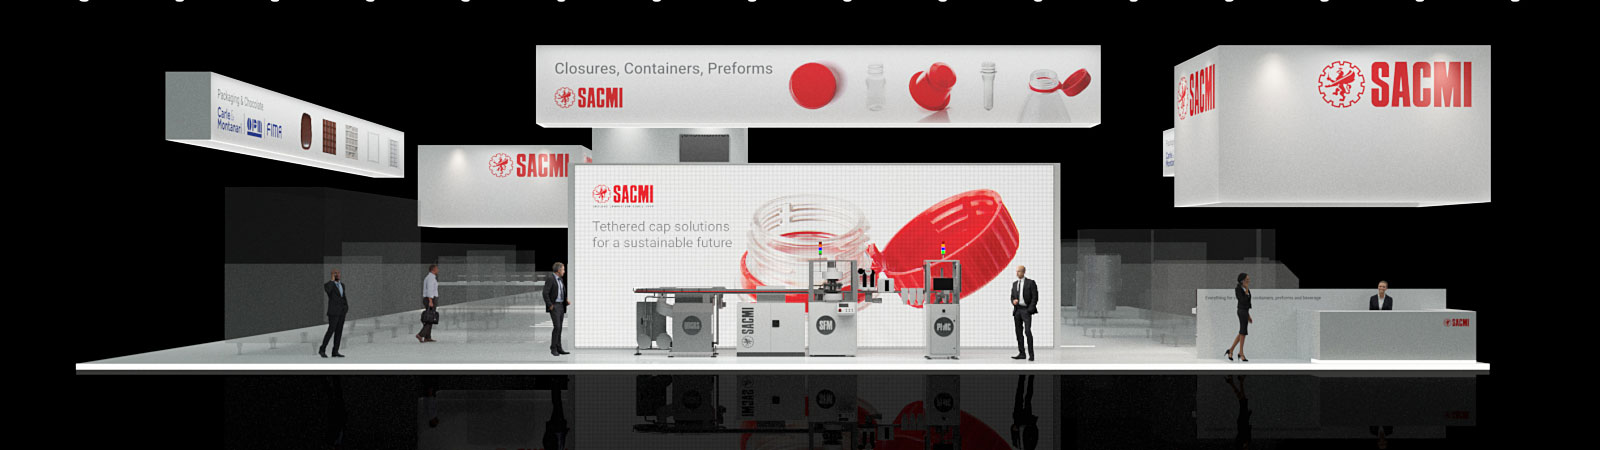 Tethered r-evolution: the SACMI virtual booth at Interpack 2020